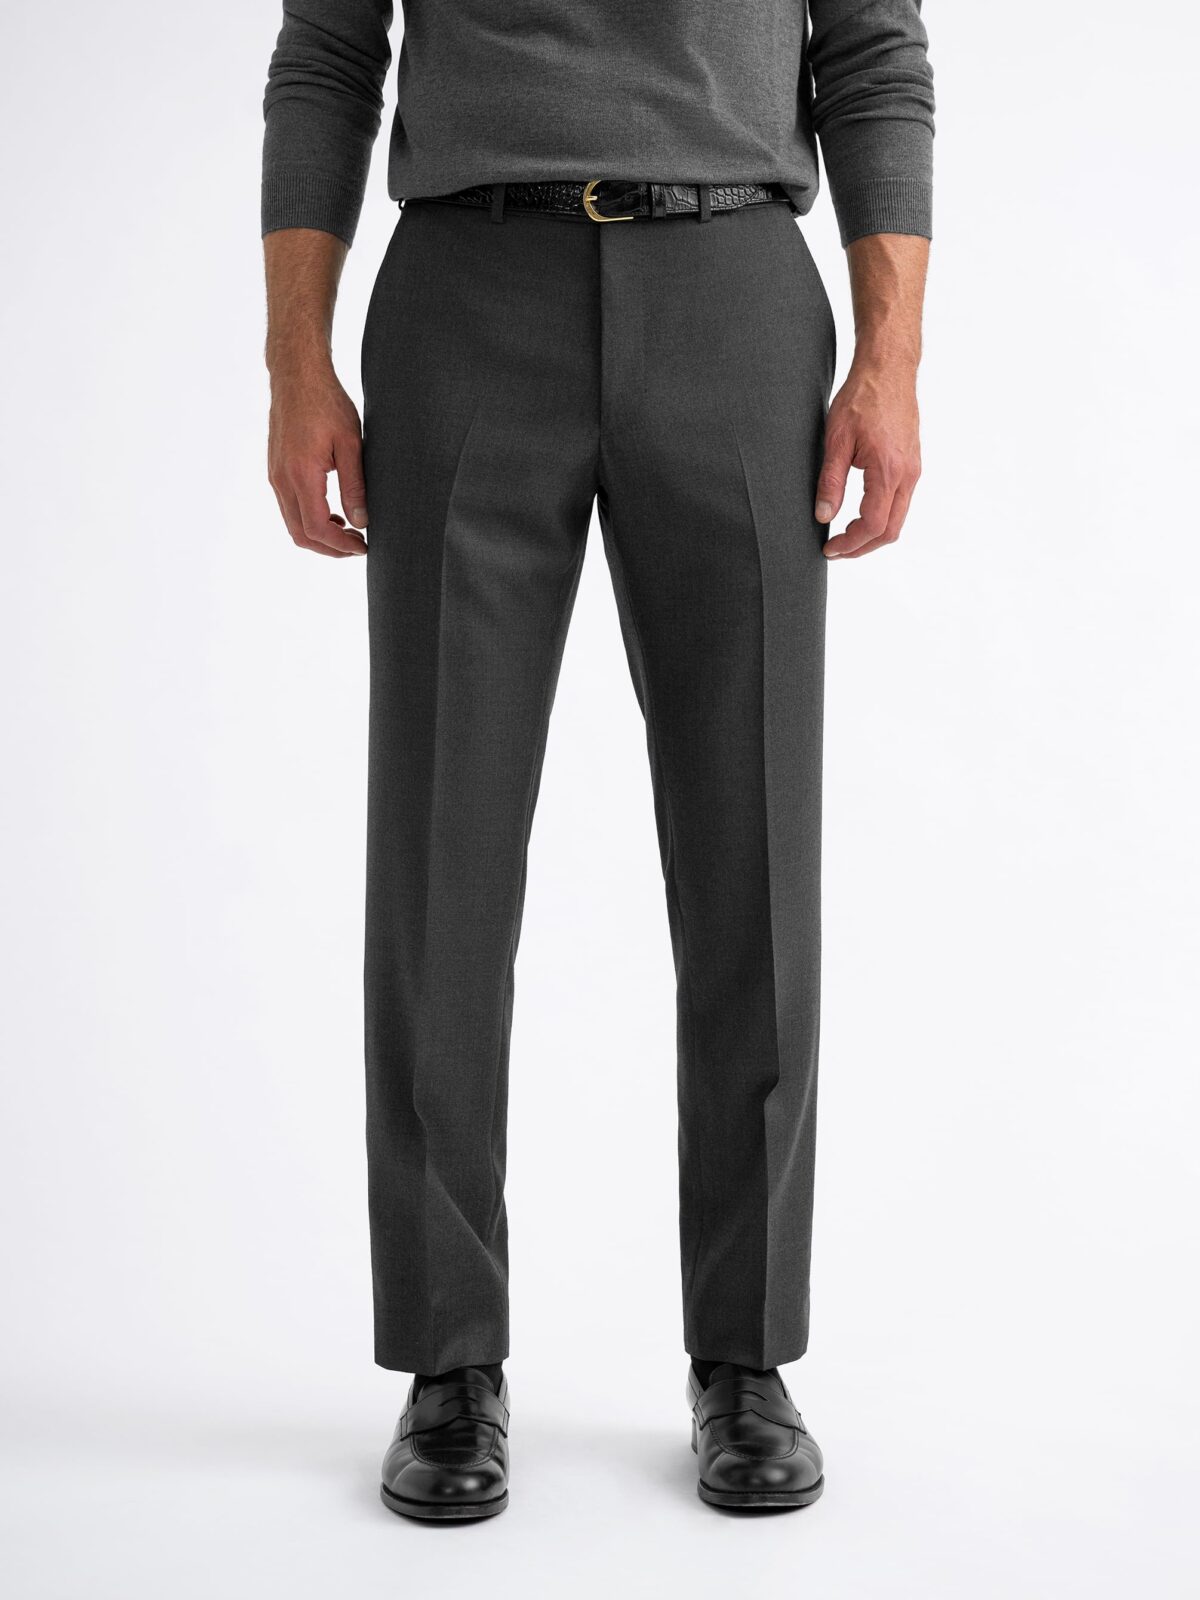 Navy Stretch Cotton Dress Pant - Custom Fit Tailored Clothing